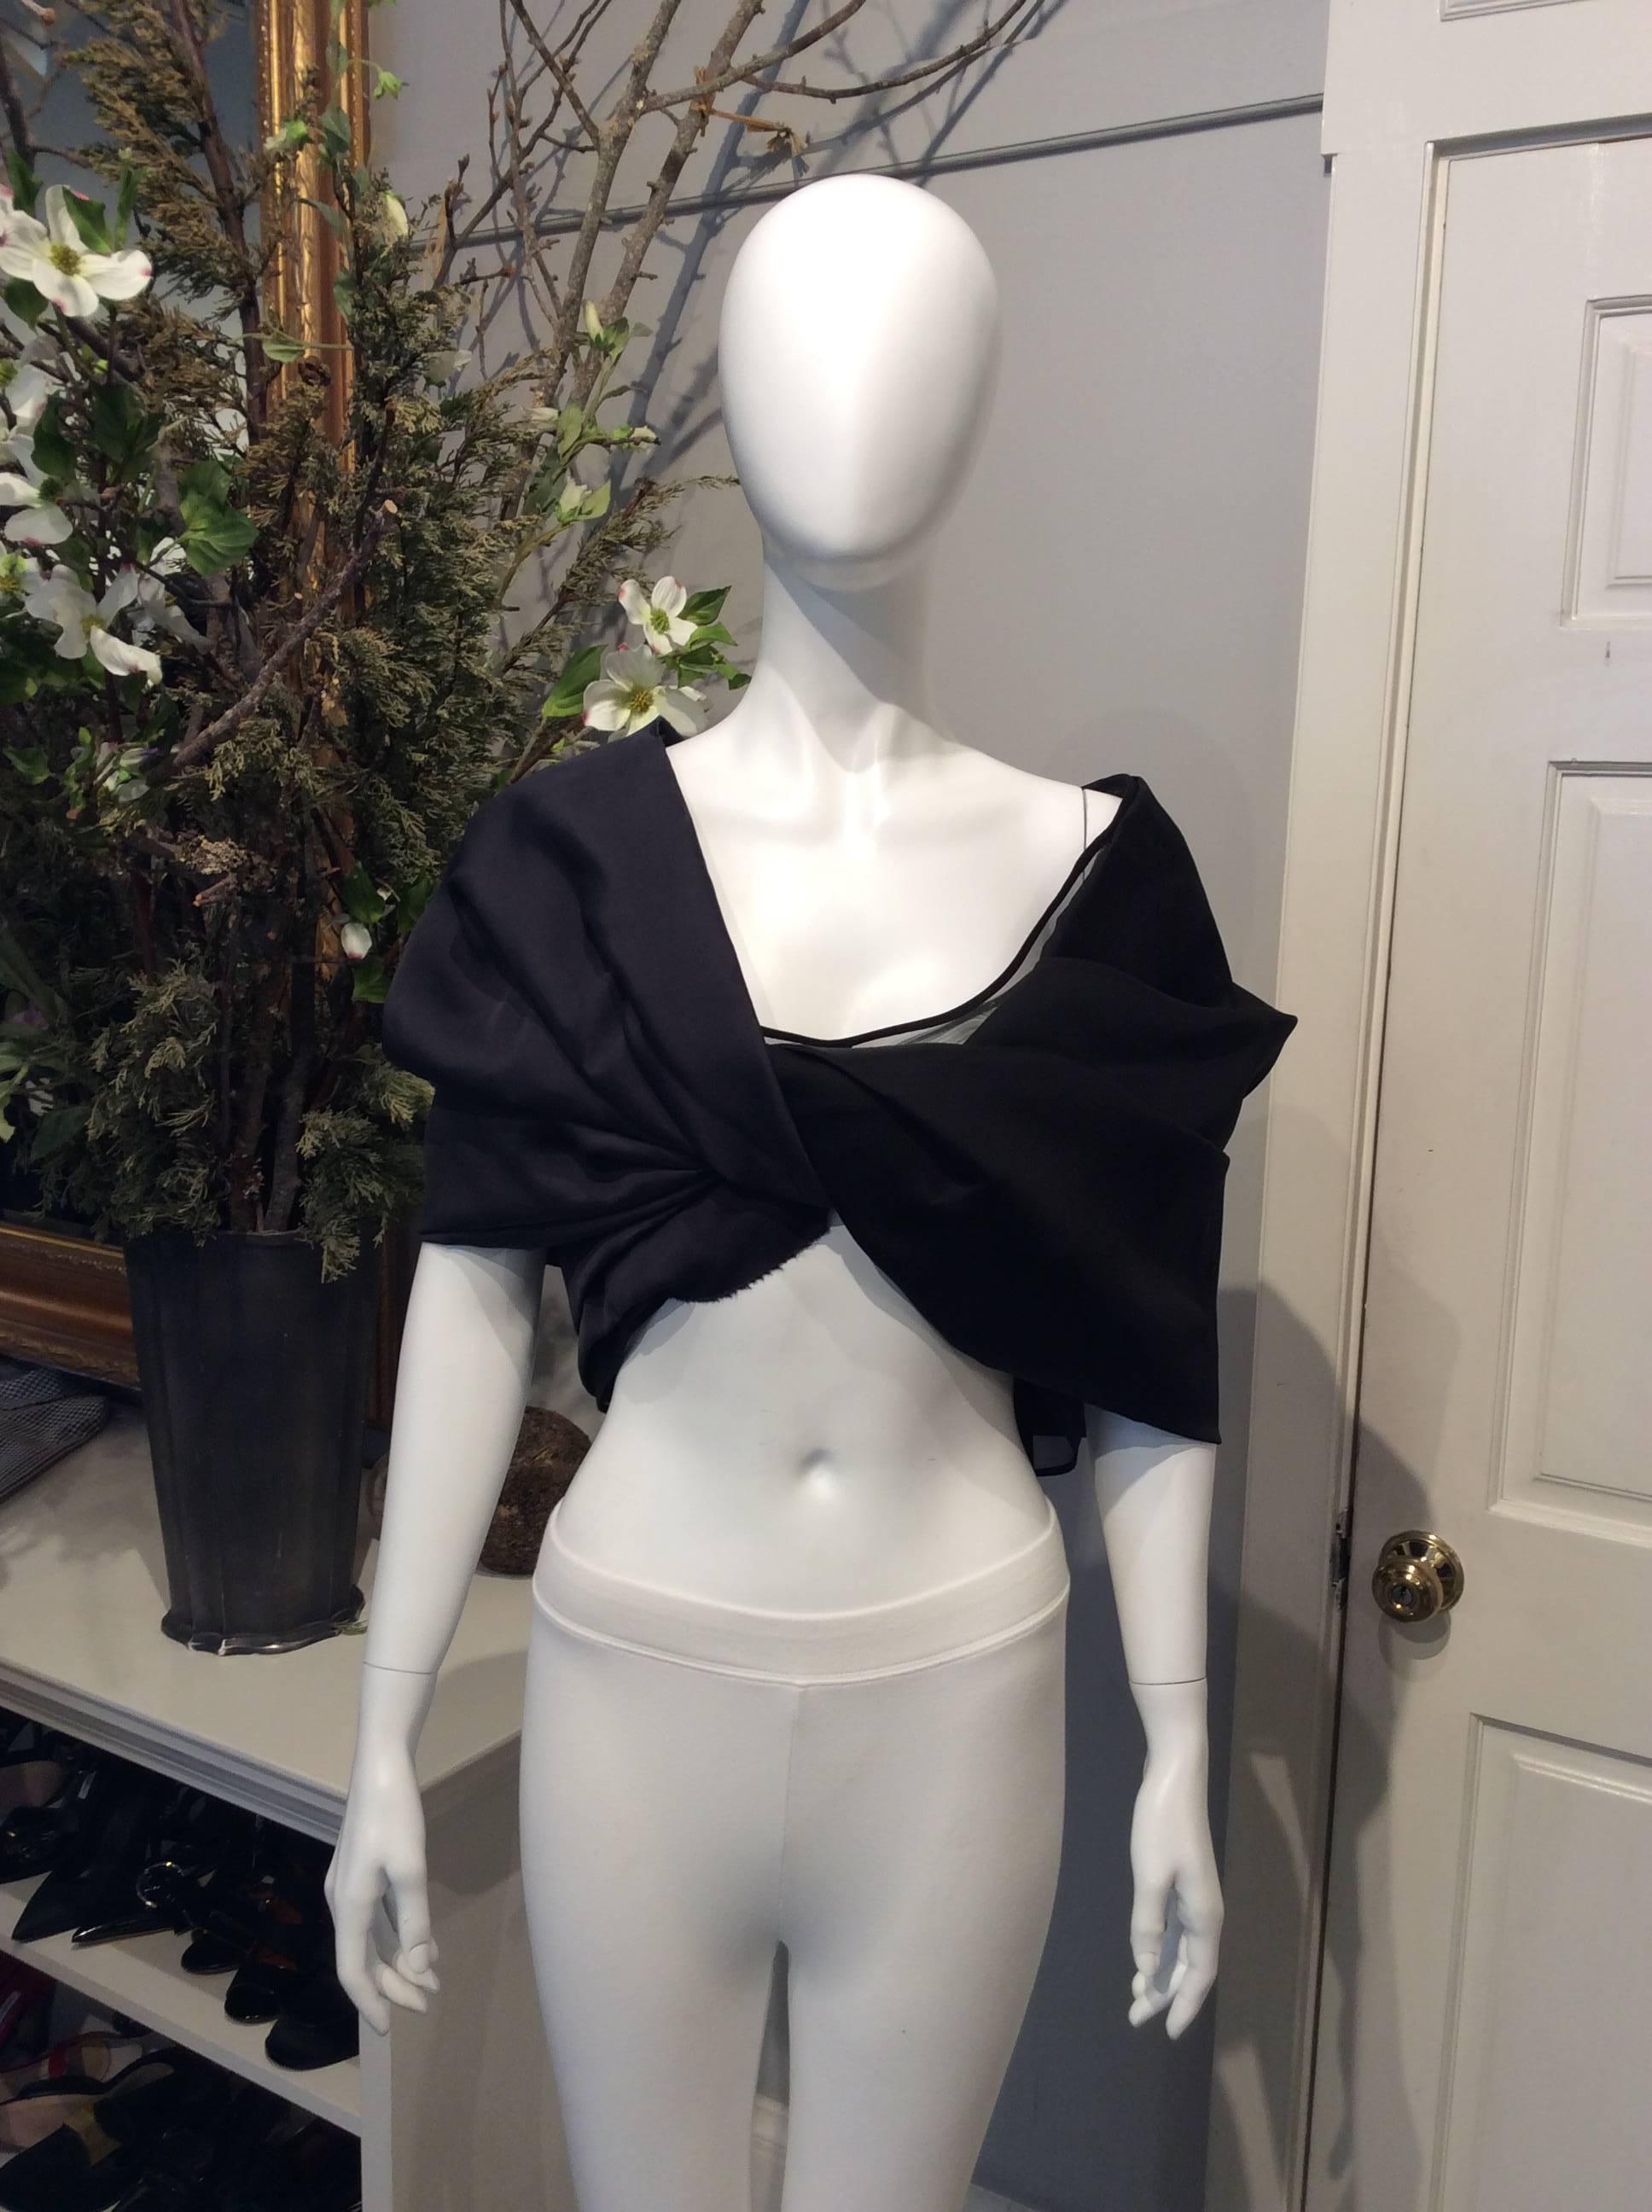 Celine black and navy blue off-the-shoulder cropped shirt from the Phoebe Philo Modele Depose collection. Dramatic draping in front that gathers in a ruched seam in back. Nylon mesh lining throughout. Zipper and hook and eye closure in back.